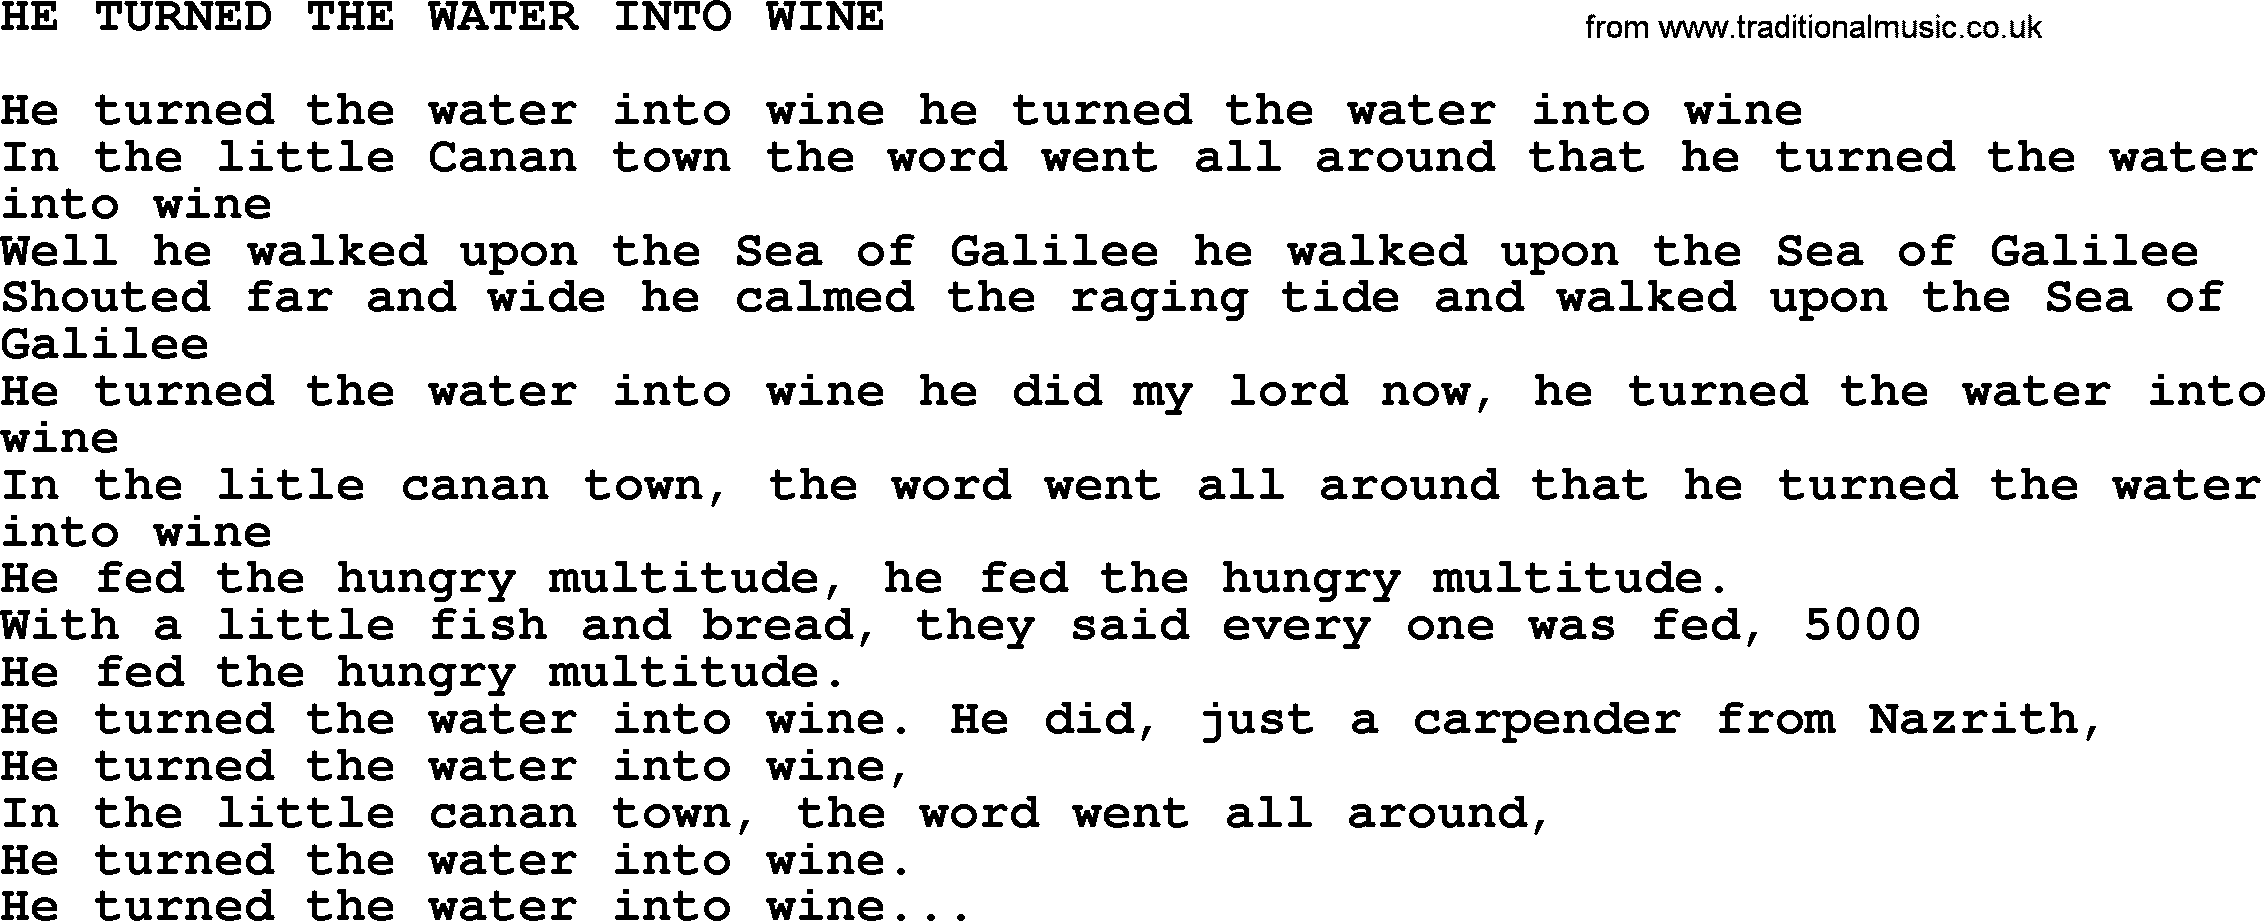 Johnny Cash song He Turned The Water Into Wine.txt lyrics